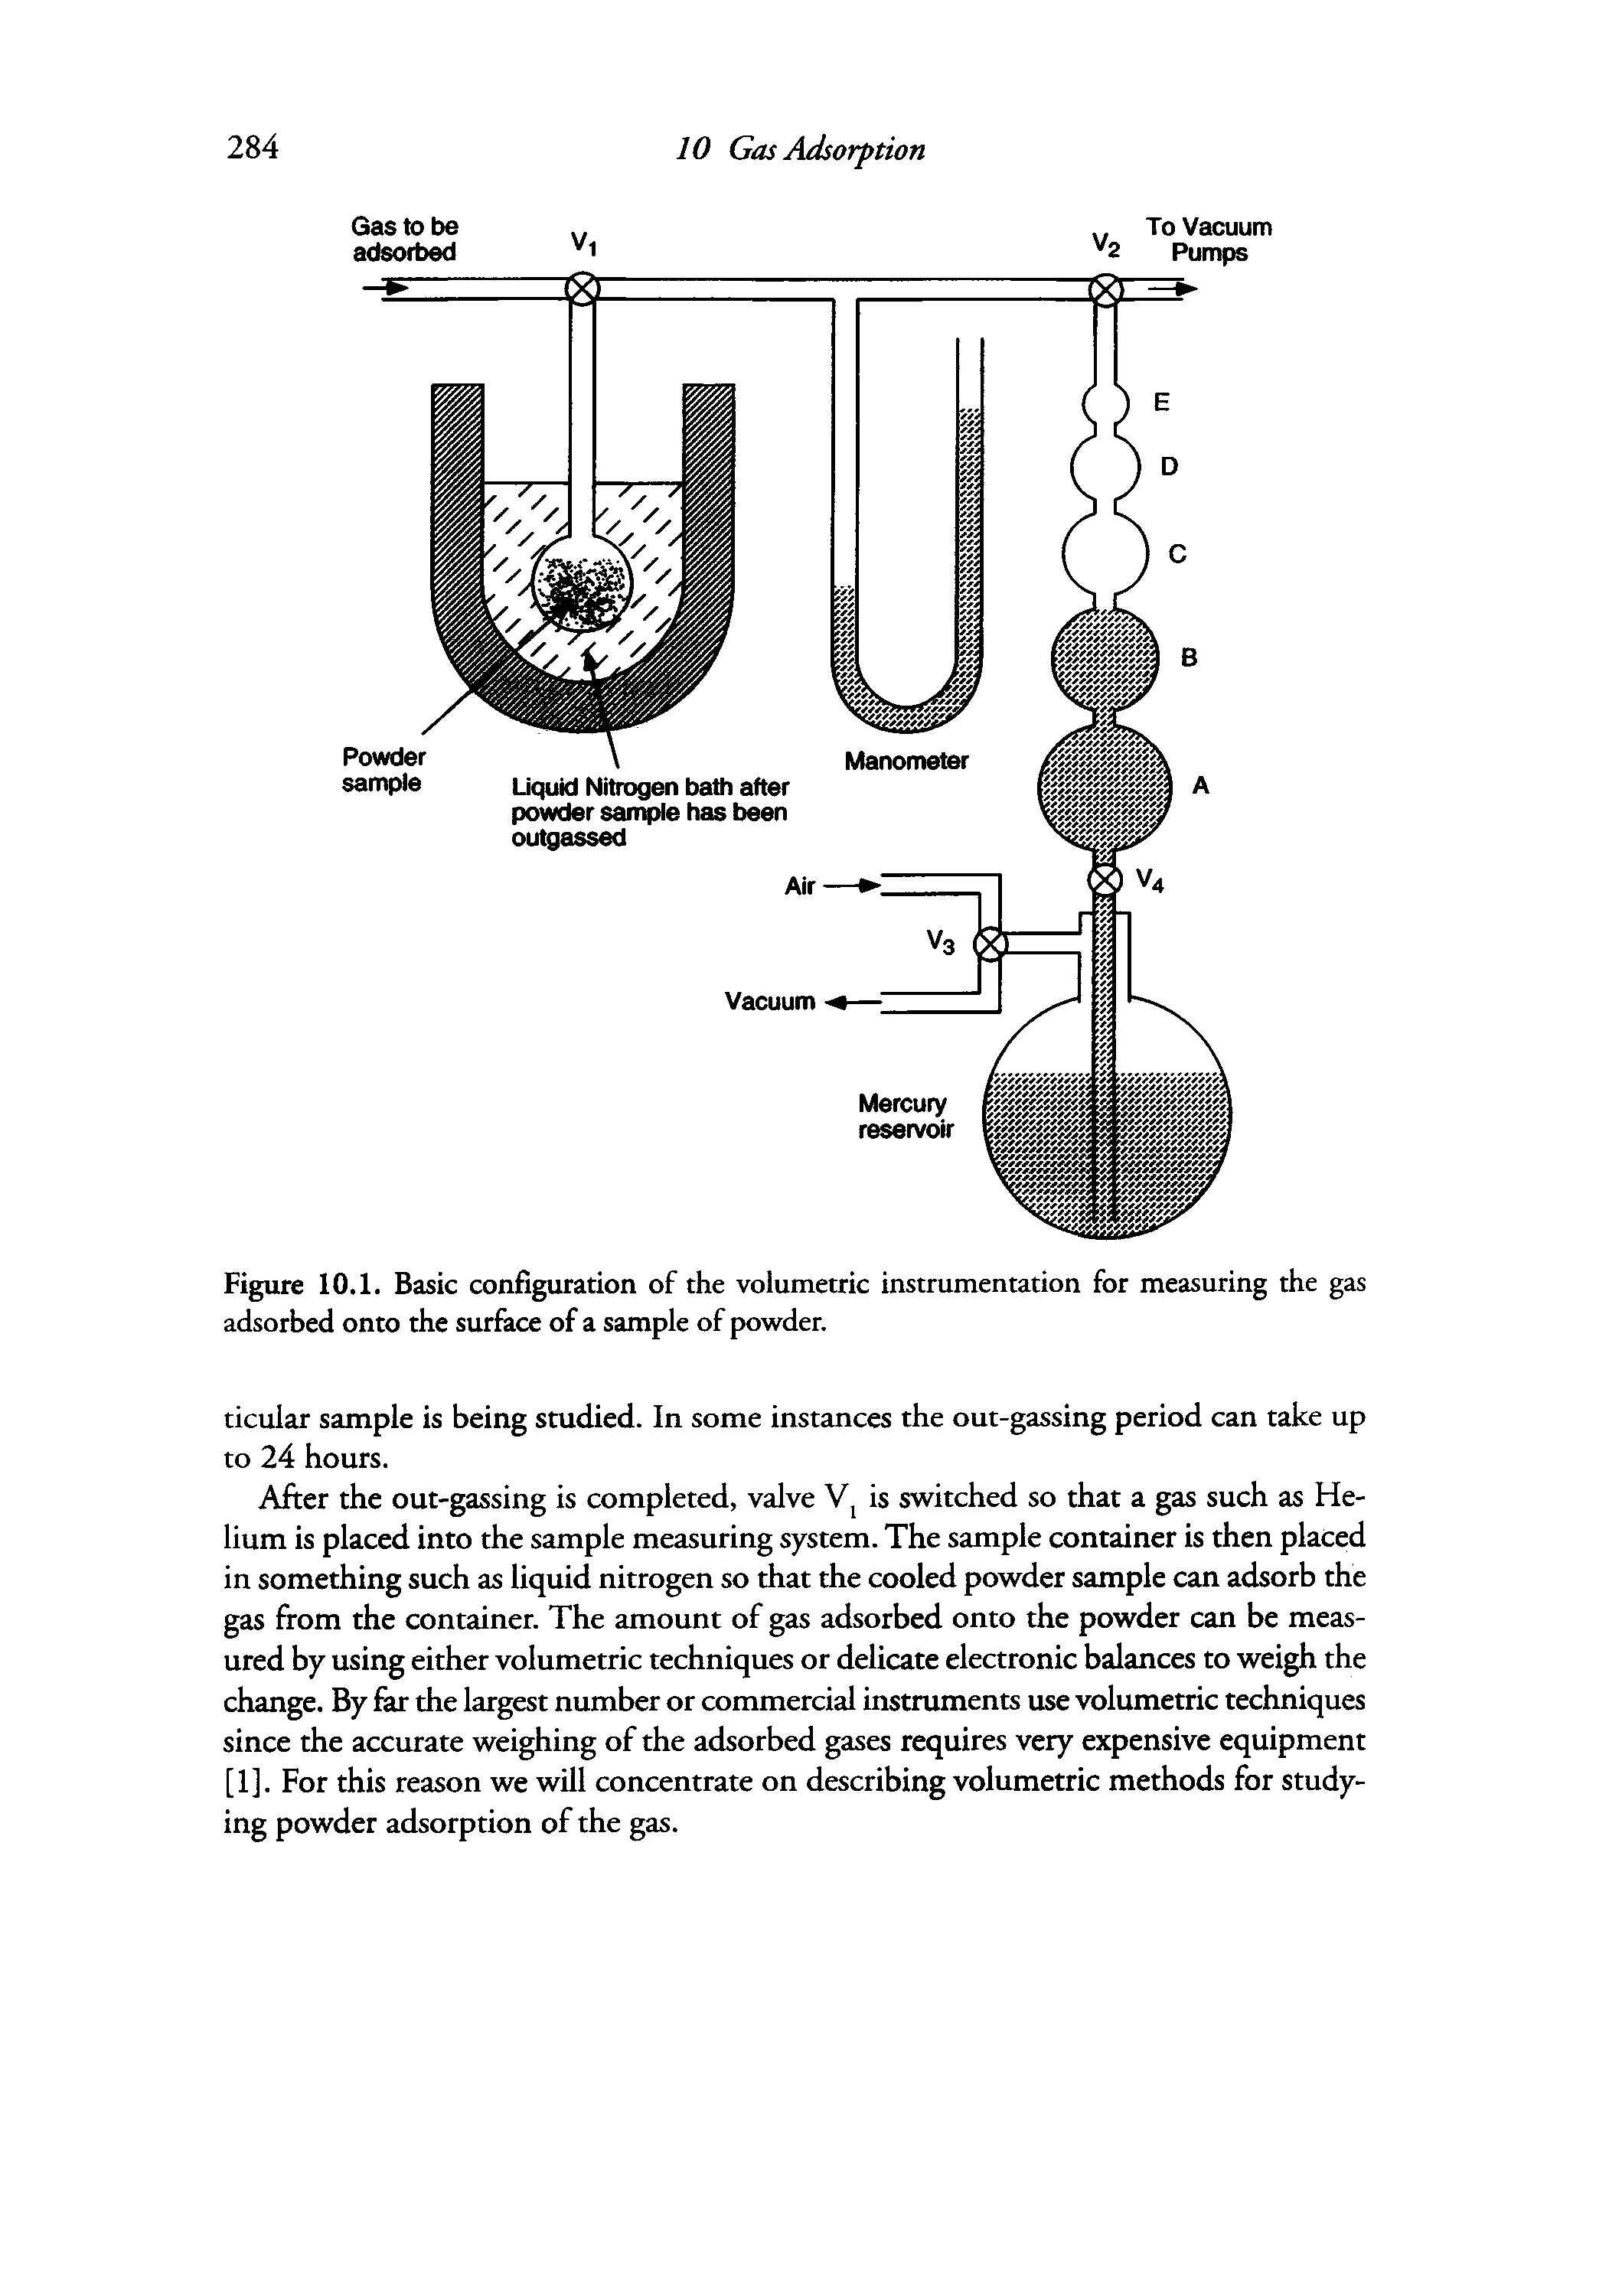 Figure 10.1. Basic configuration of the volumetric instrumentation for measuring the gas adsorbed onto the surface of a sample of powder.